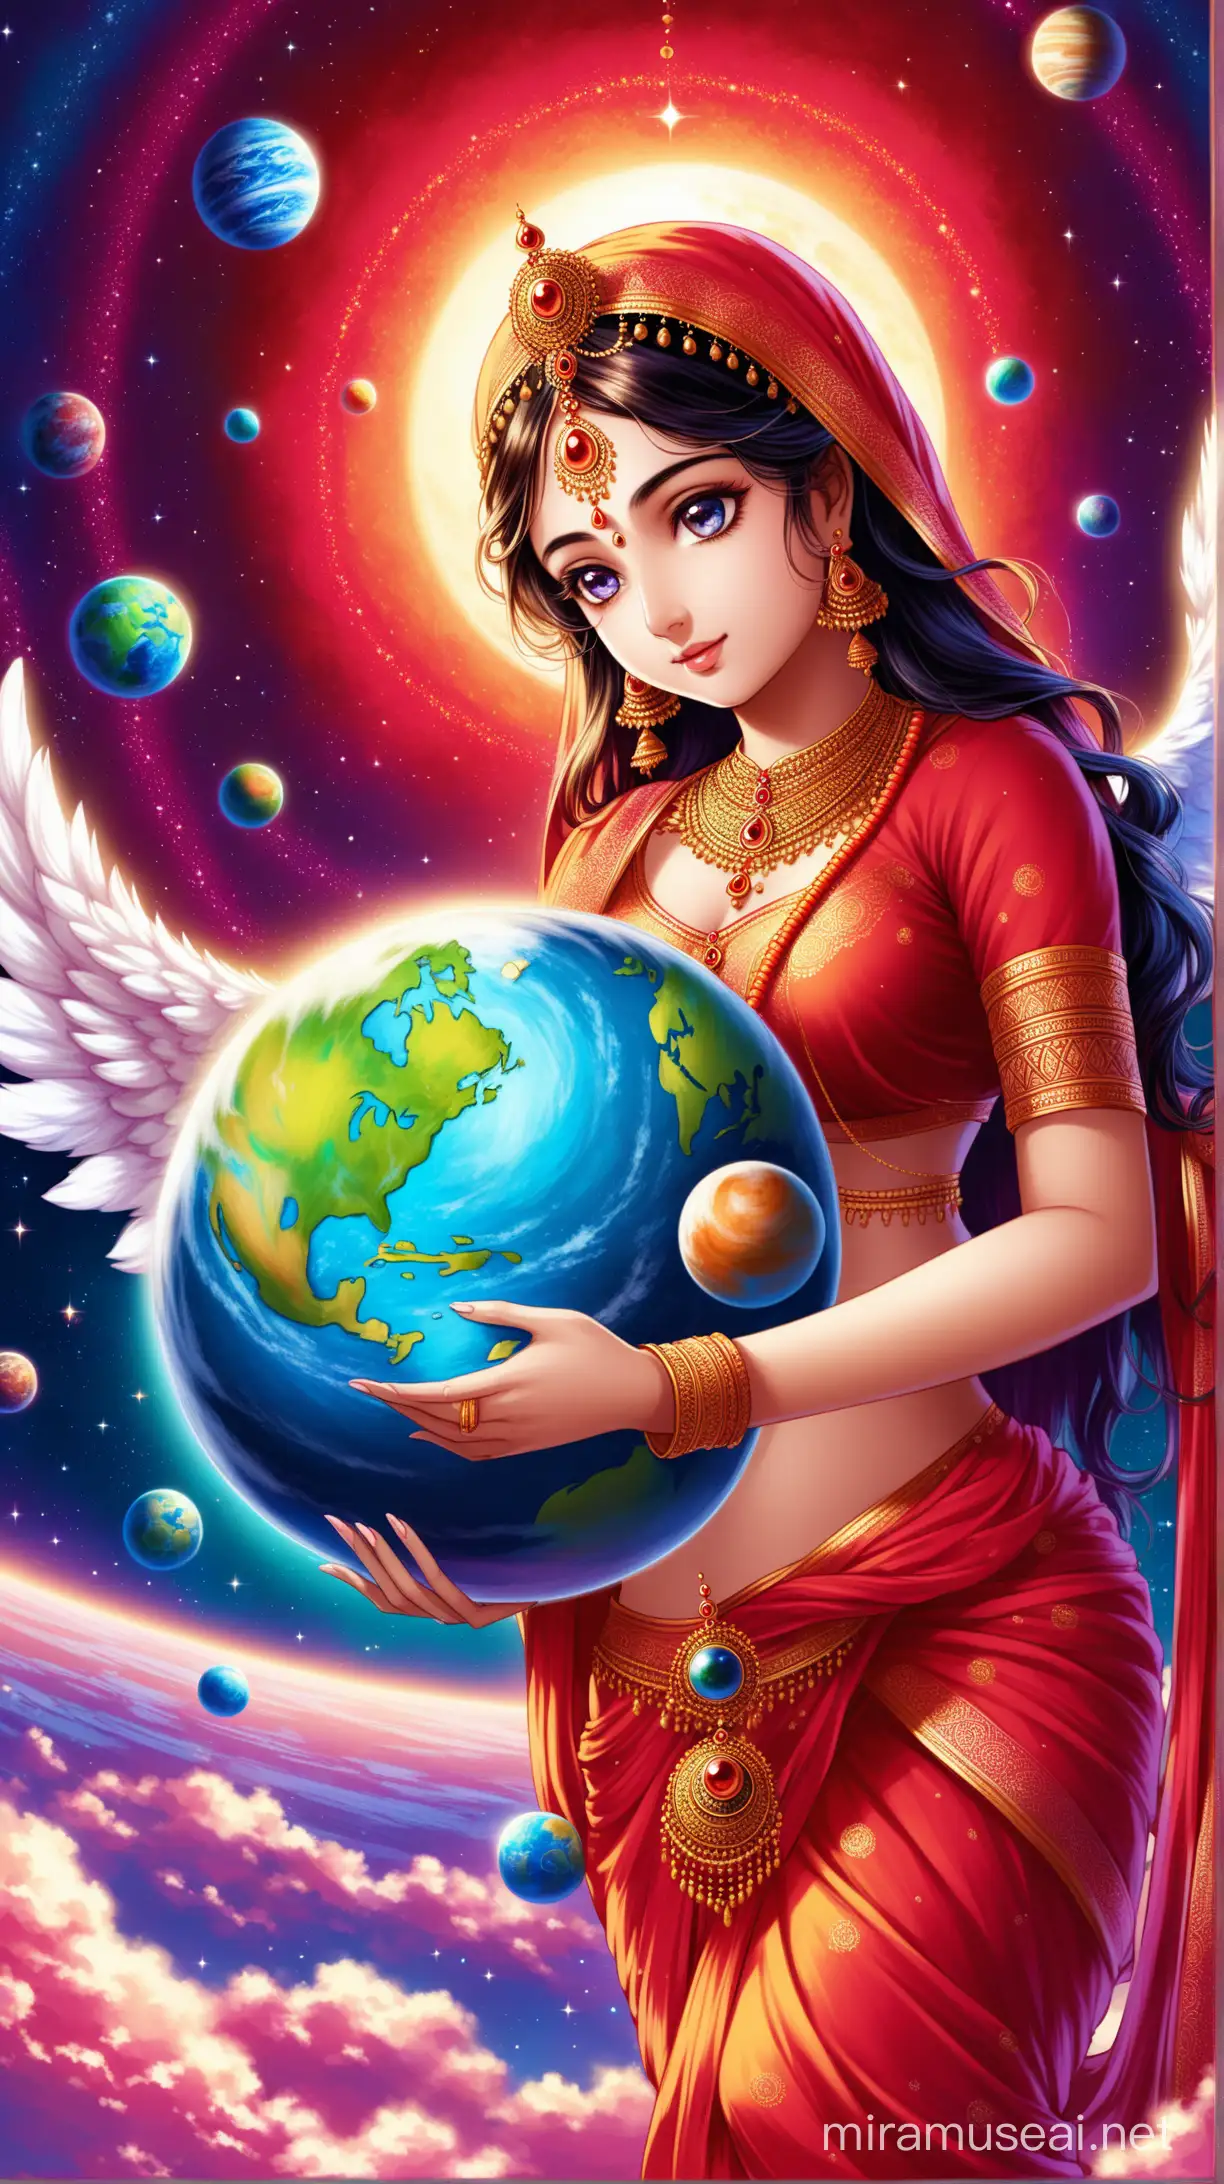 Joyful Radha Playing with Planets in a Celestial Scene